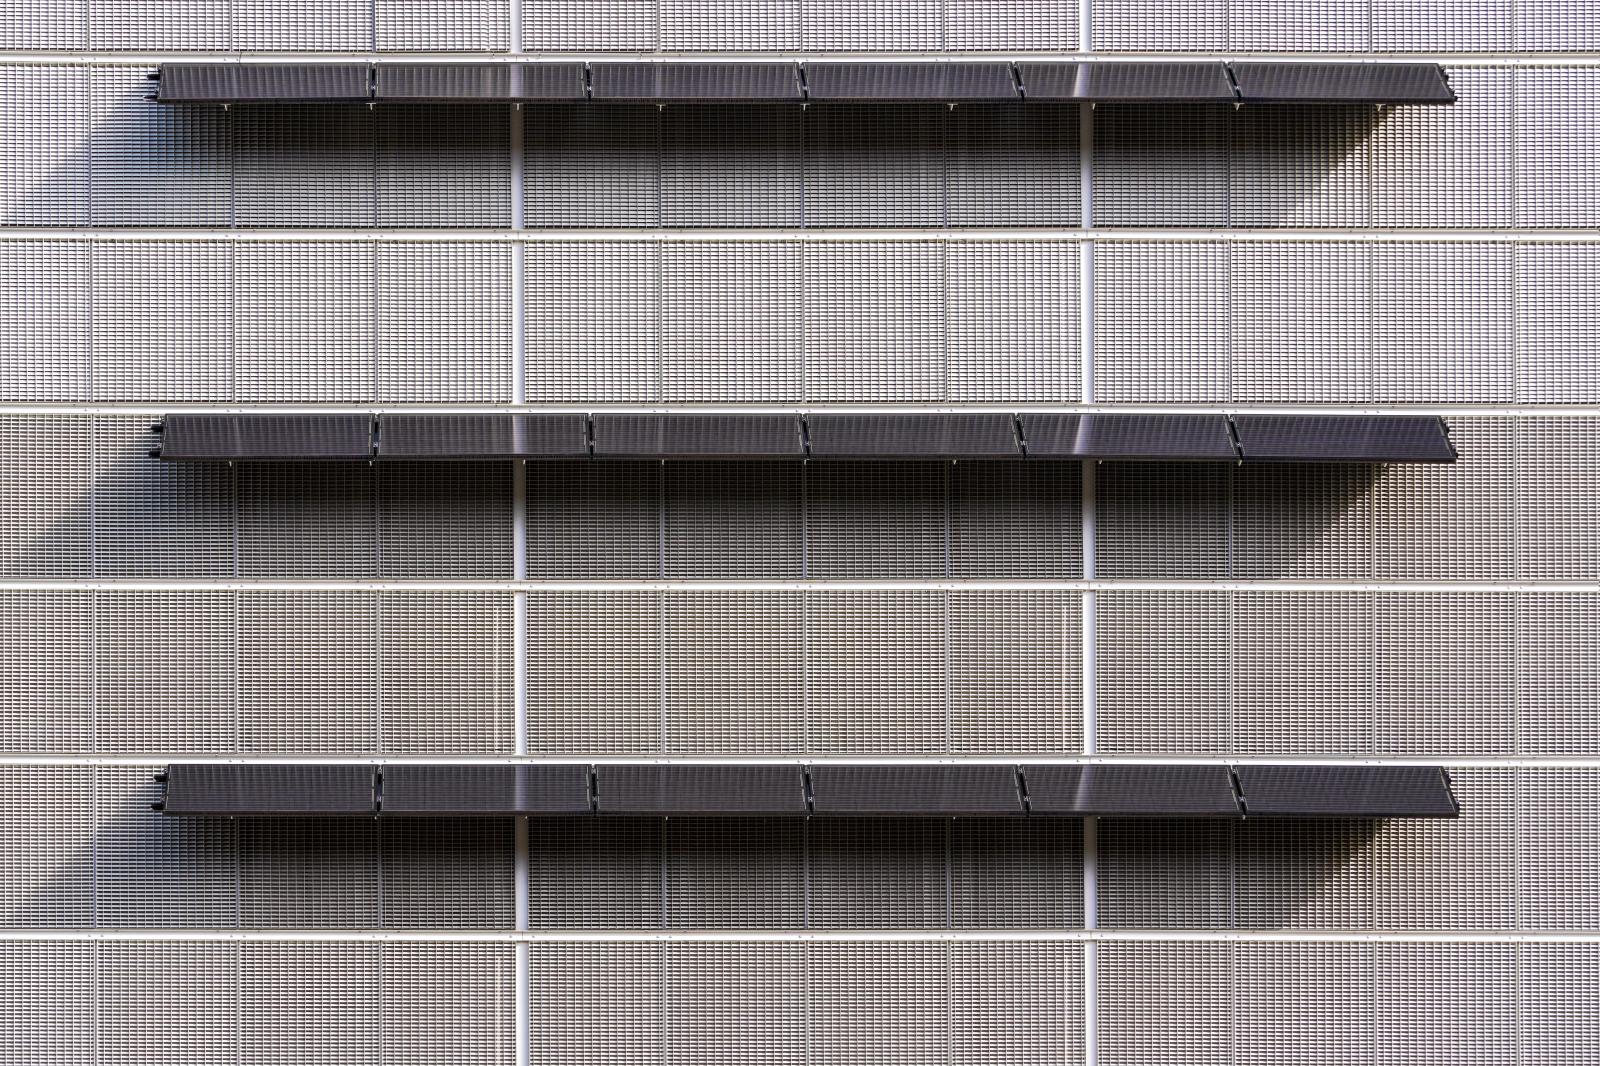 Image from New Photographs -  Munich, Germany  # 4166 2/2024 Shades of Sustainability....